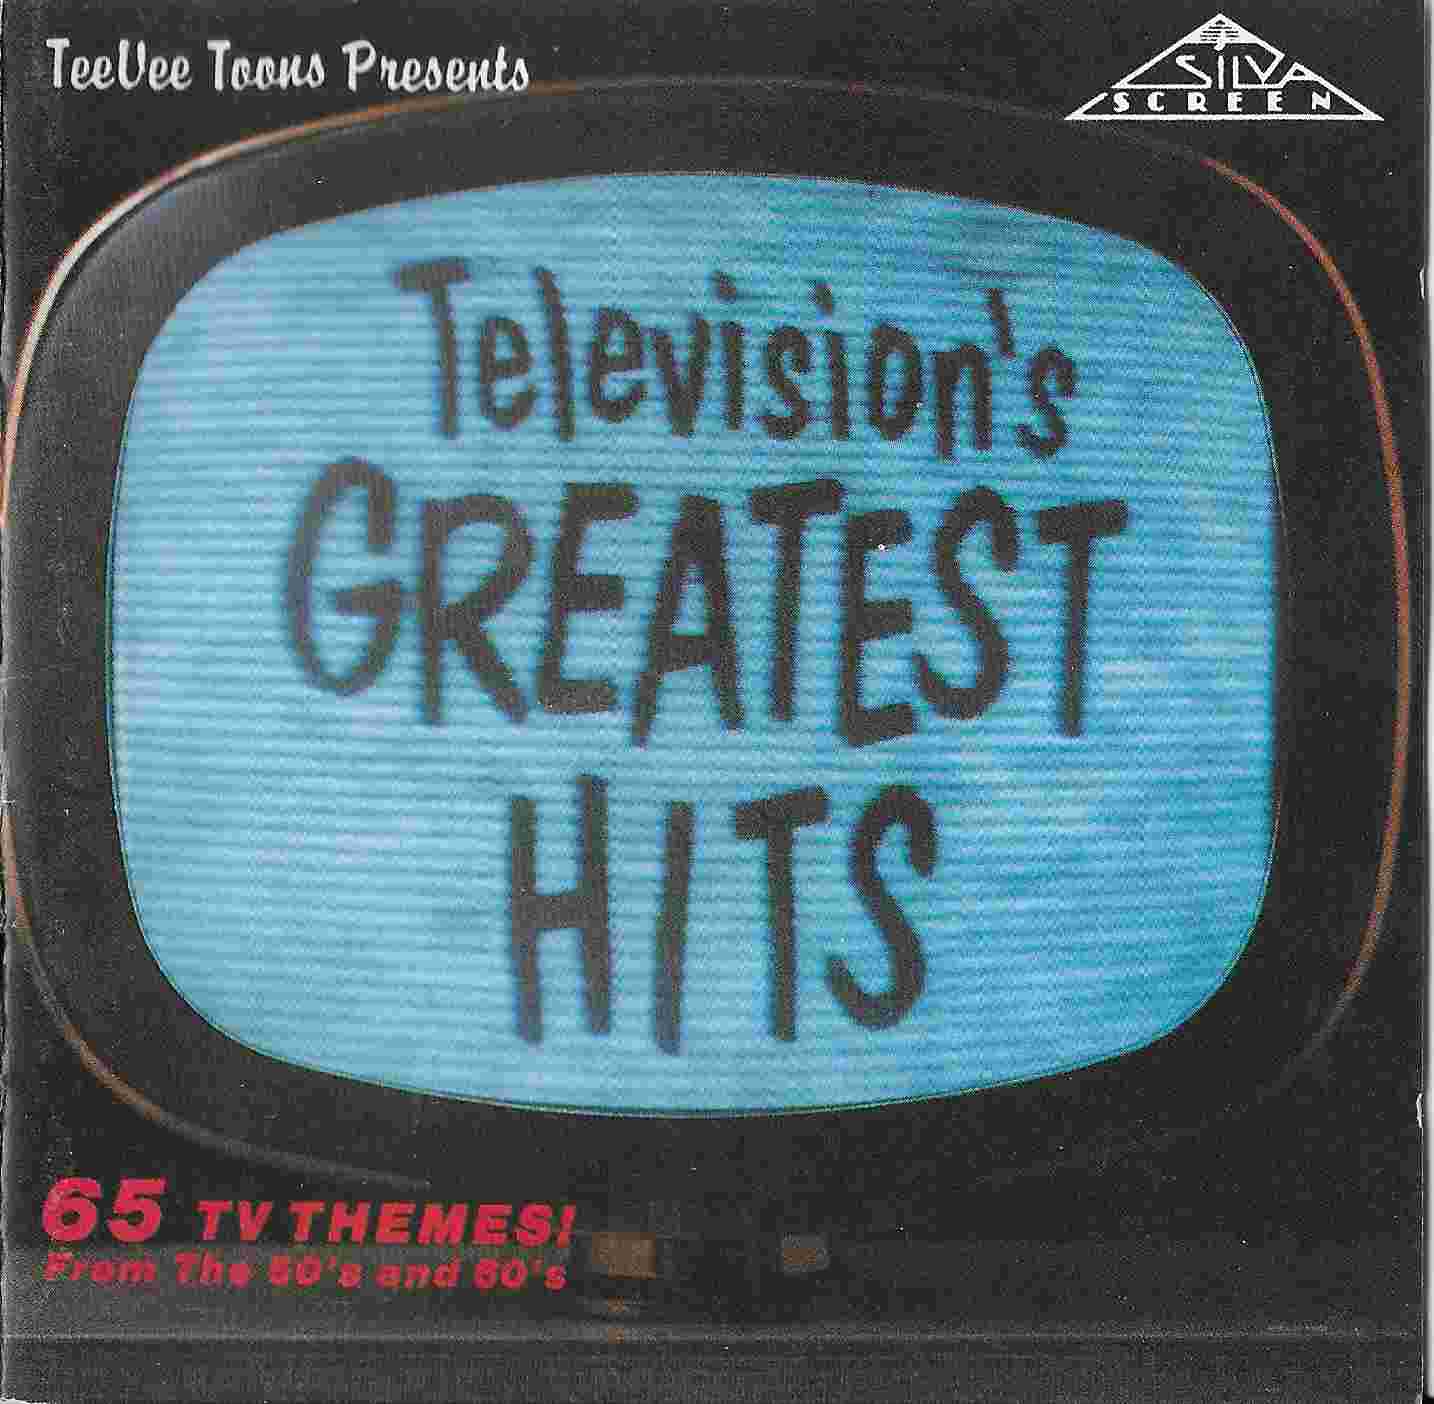 Picture of FILMCD 024 Television's greatest hits - Volume 1 by artist Various from ITV, Channel 4 and Channel 5 cds library